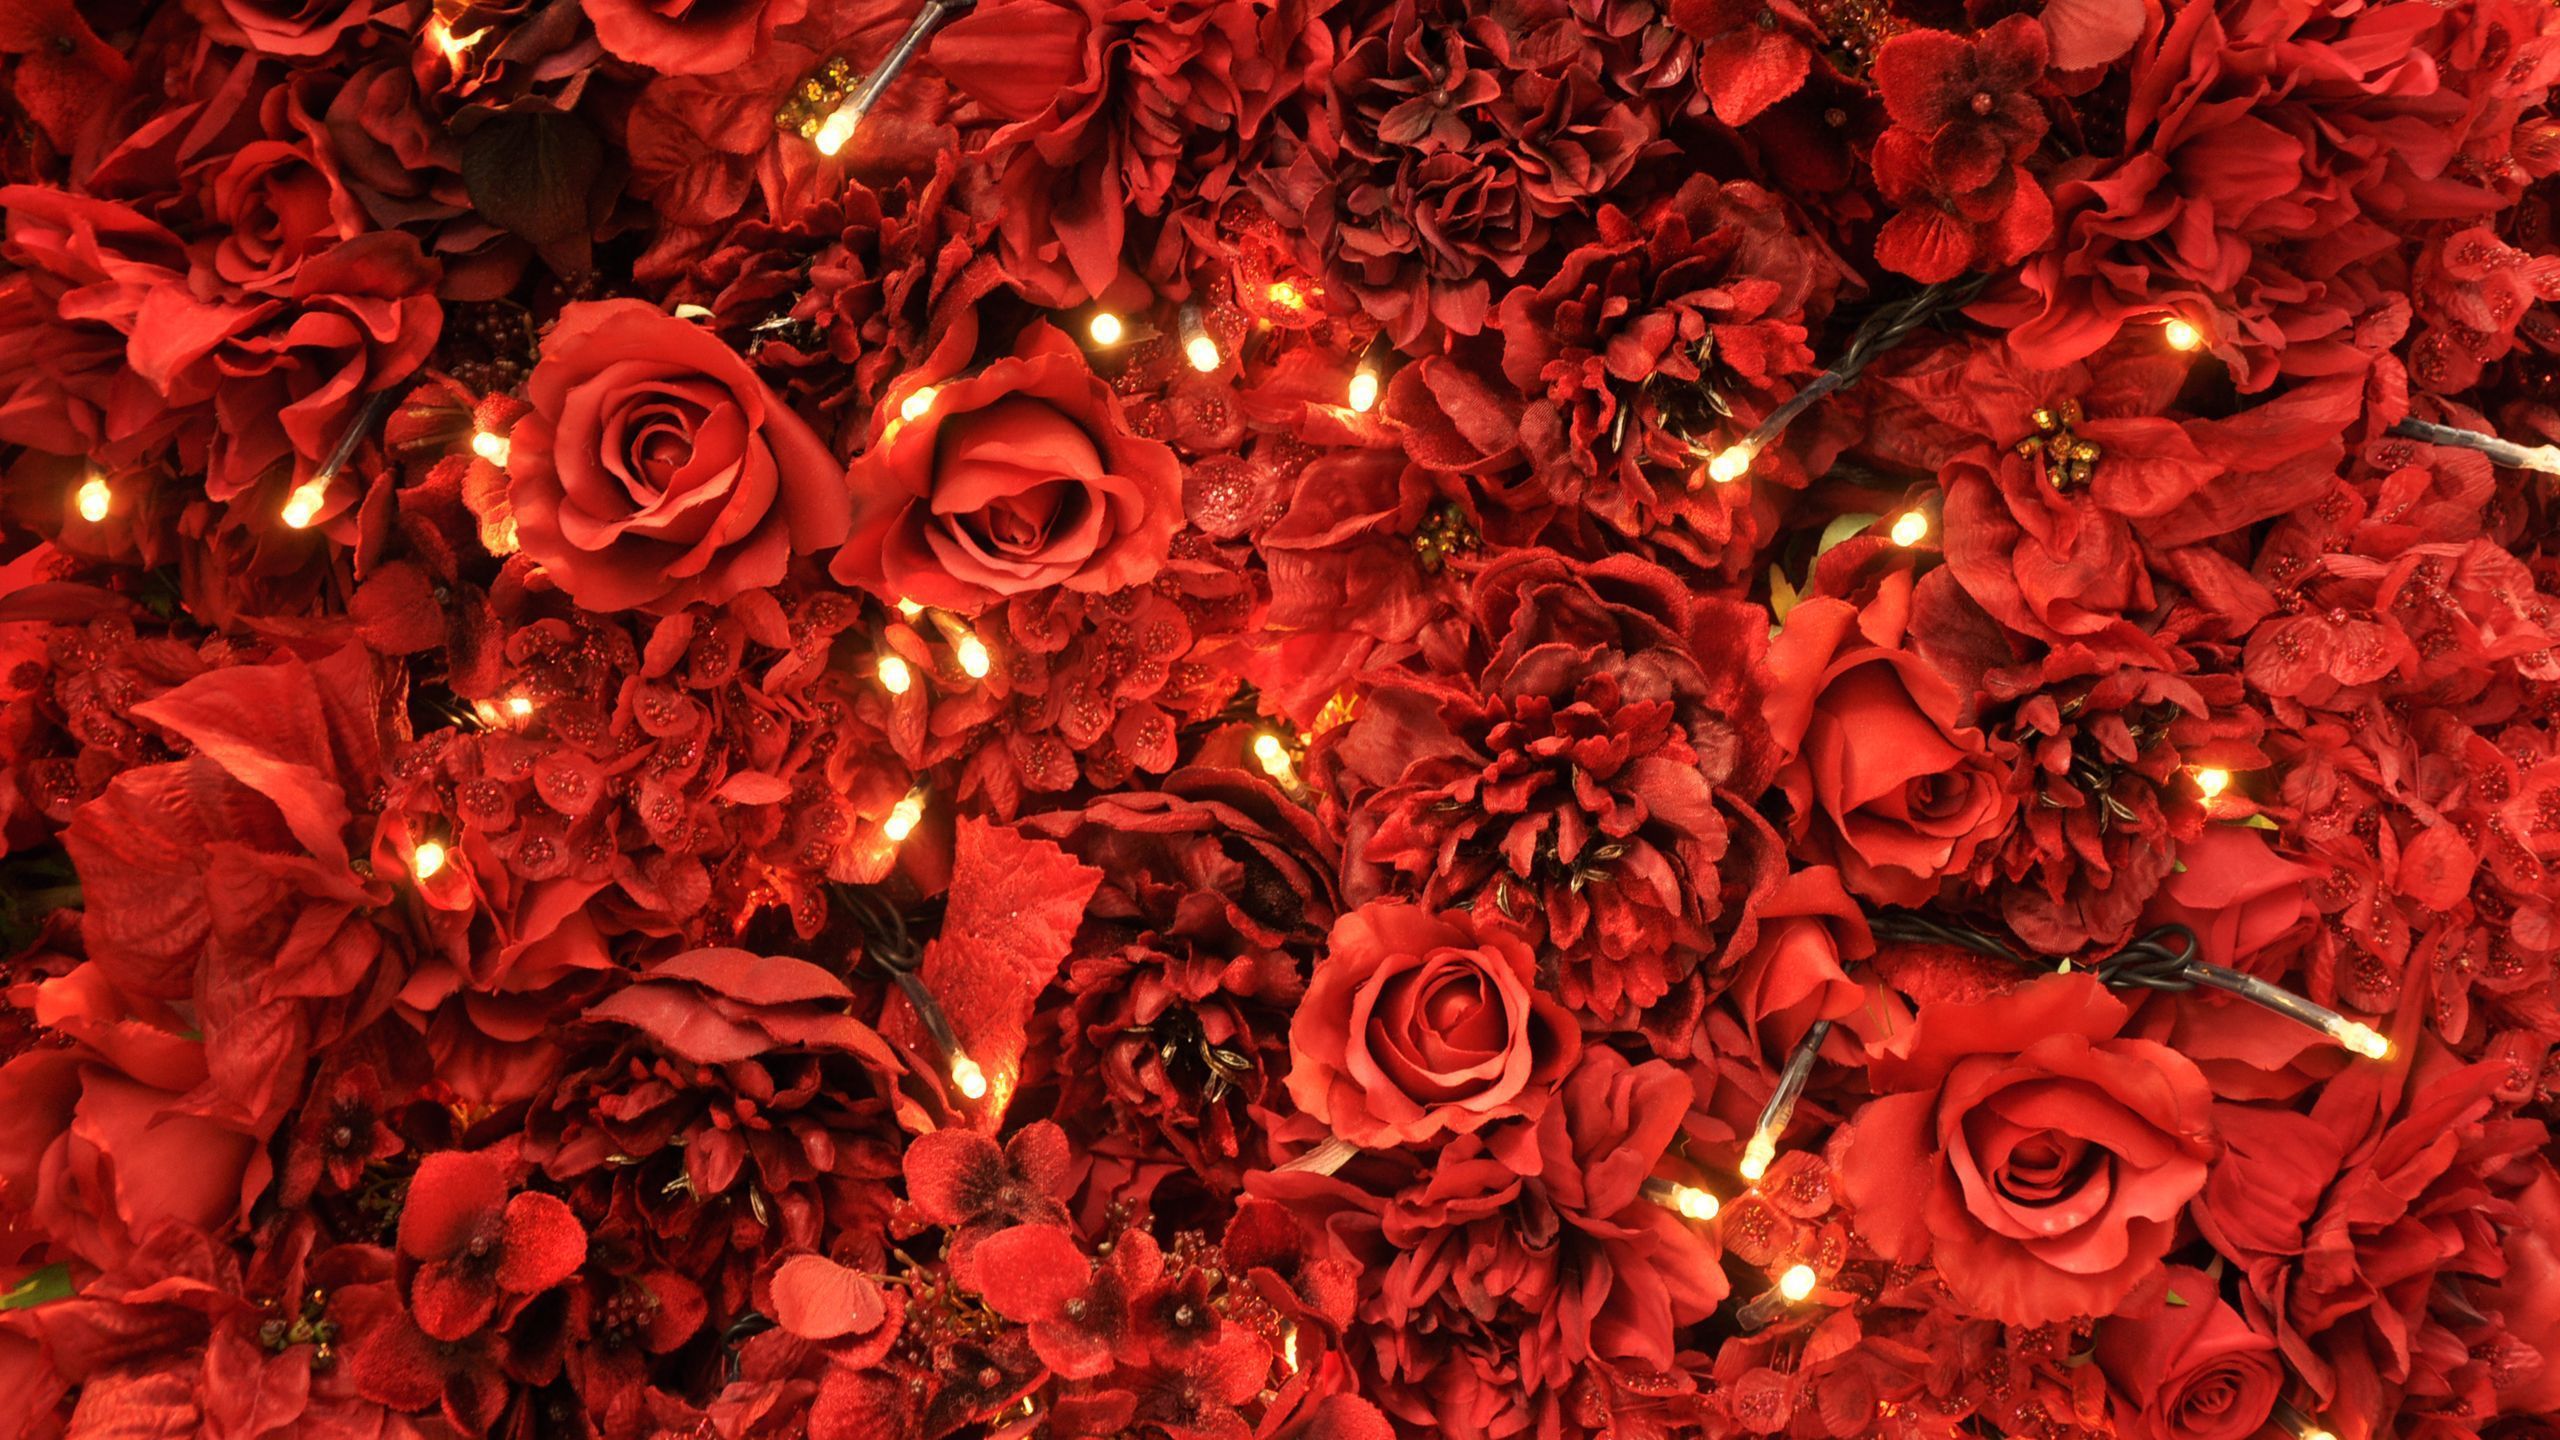 A close up of some red flowers - Red, roses, light red